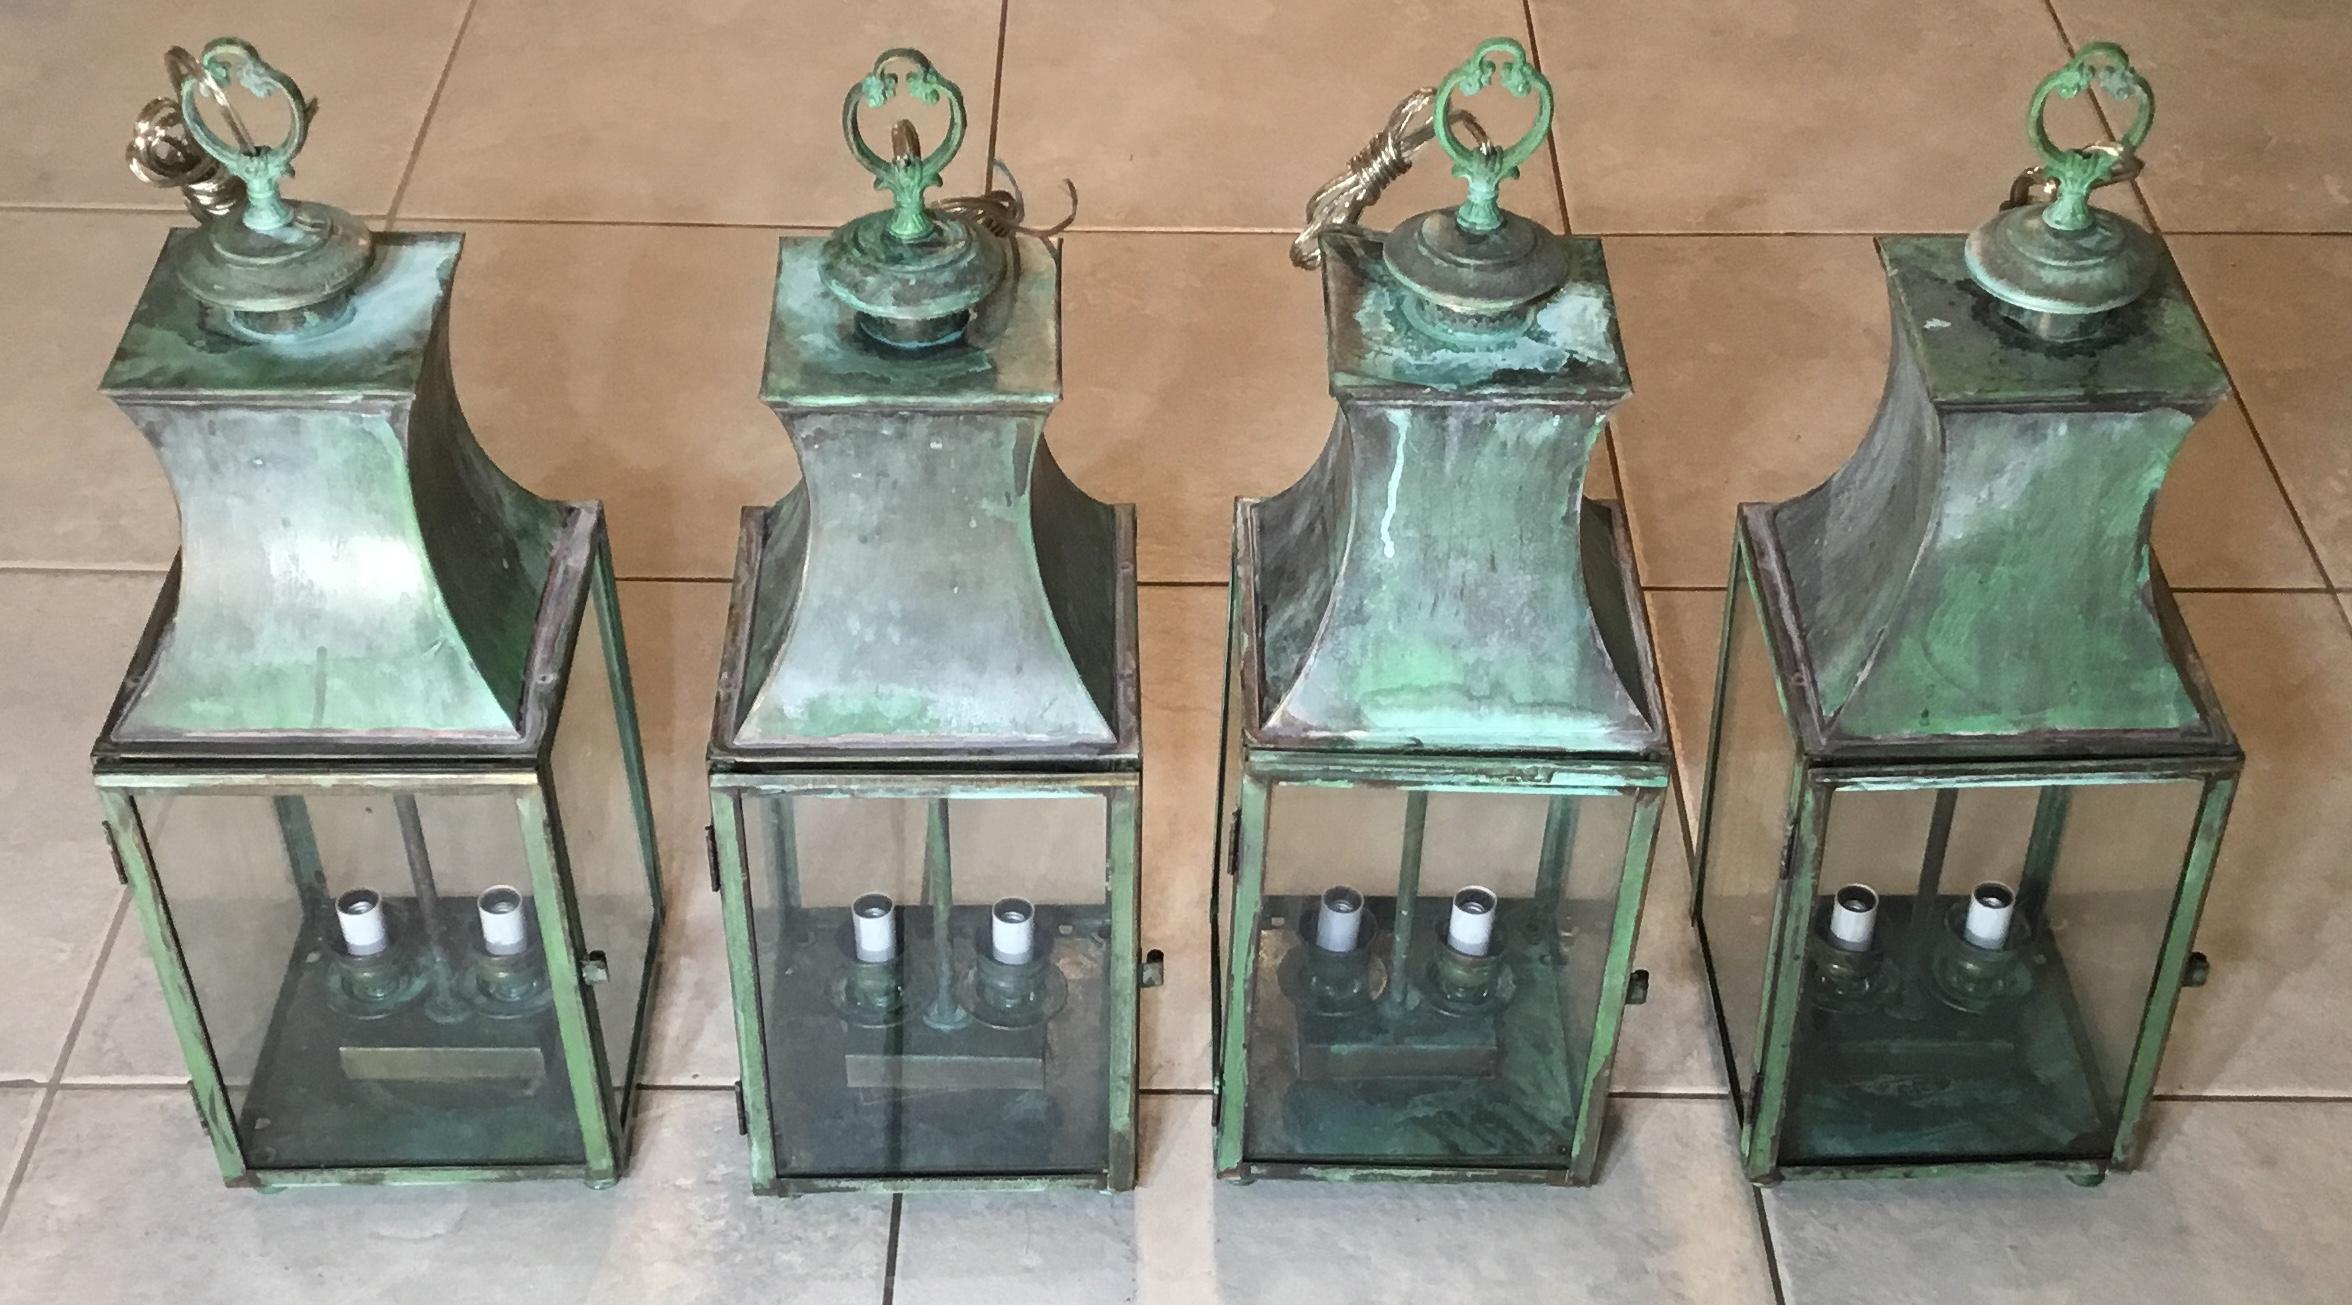 Elagent hanging lanterns made of solid brass, with two 60 watt lights each, suitable for wet locations ready to use, great oxidized patina and four decorative foots at the bottom of the lantern.
Brass canopy and chain included. Could buy single or